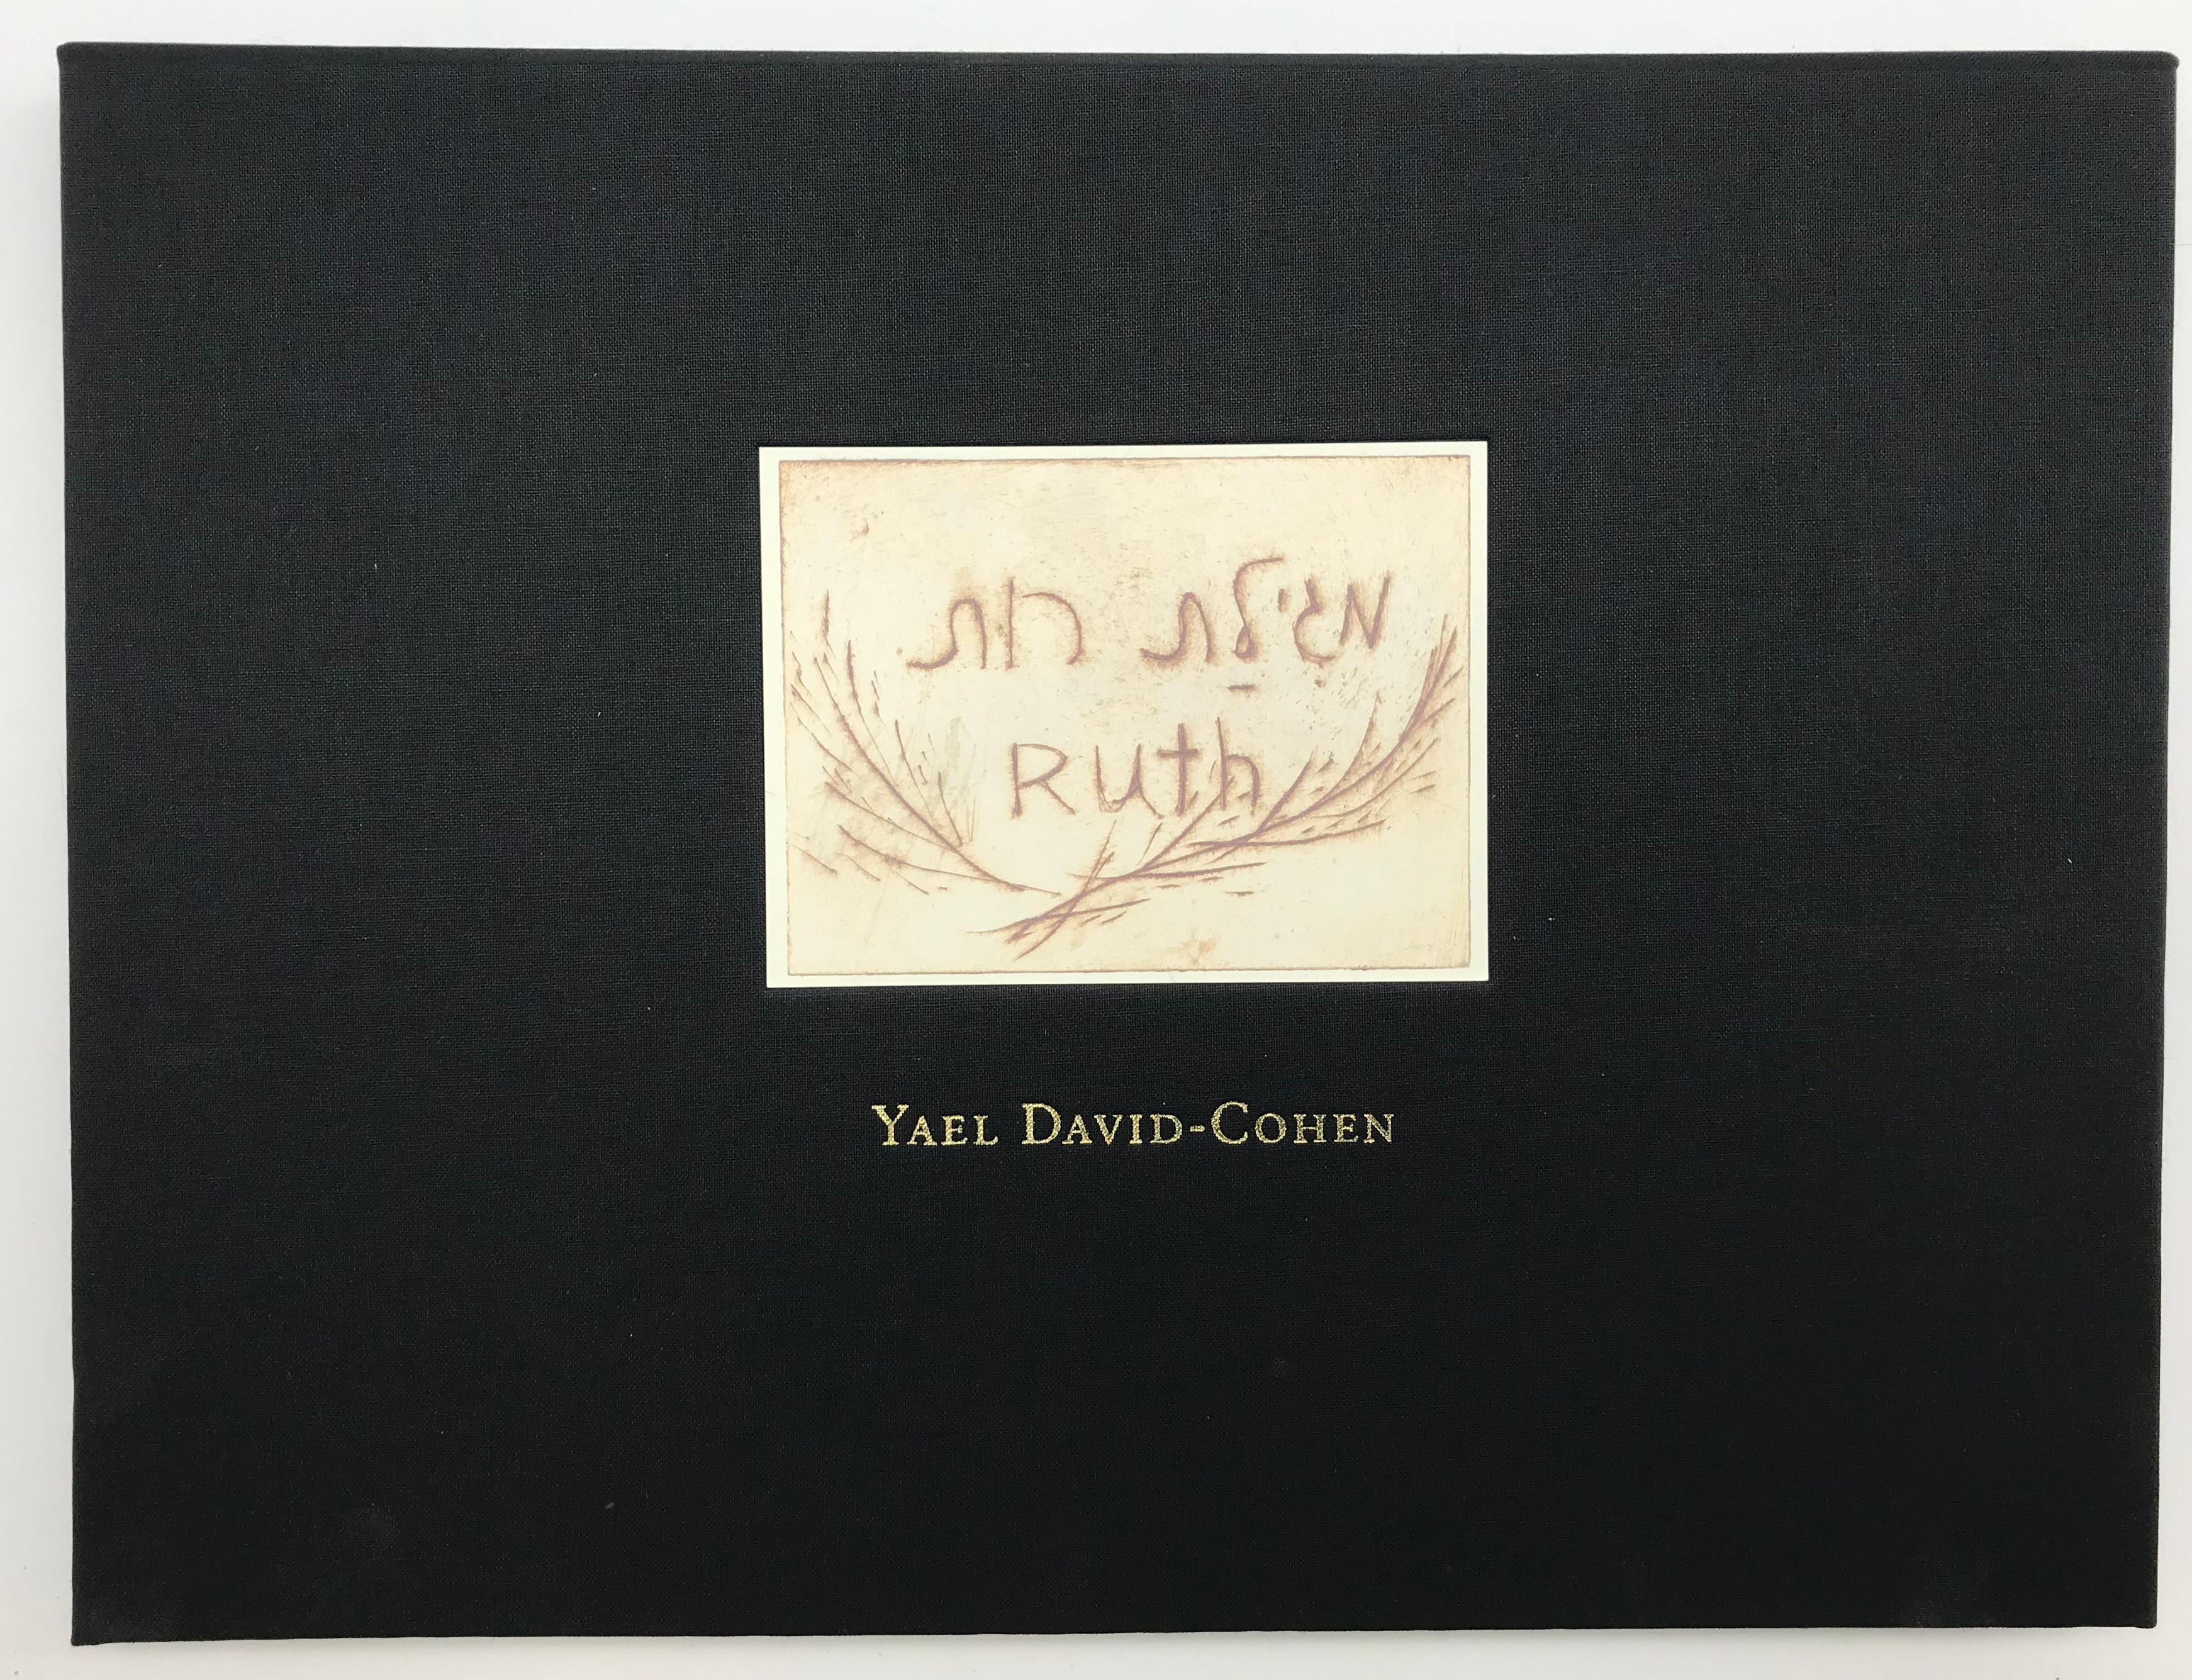 SIGNED & NUMBERED BOOK OF RUTH BY YAEL DC TOGETHER WITH TEN ARTIST PROOF PRINTS BY THE SAME ARTIST - Image 11 of 12